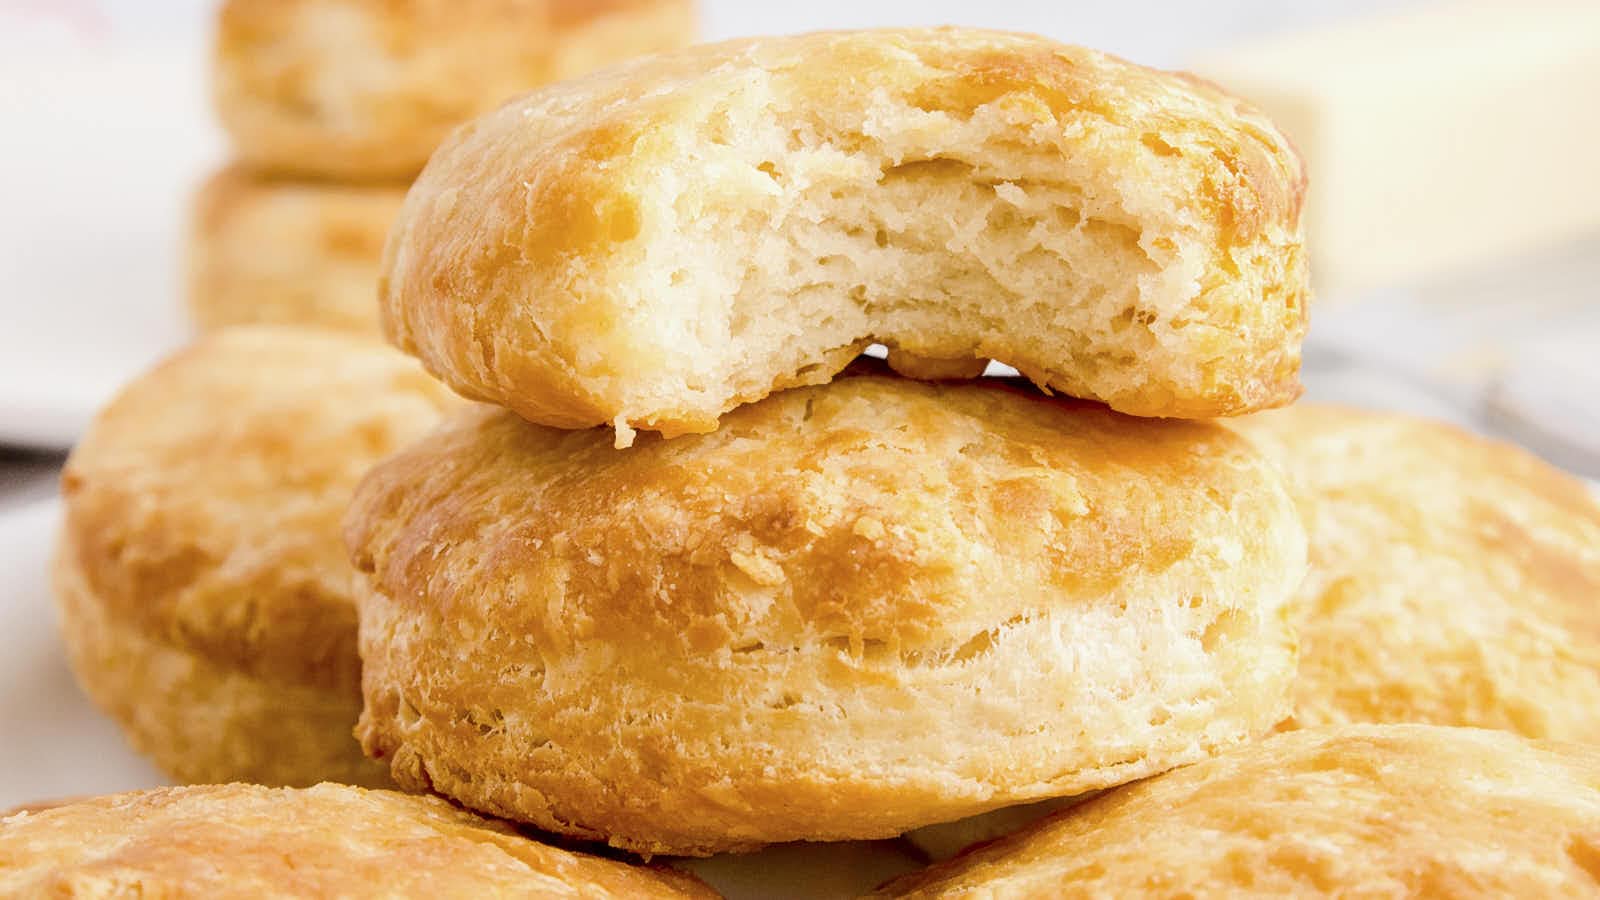 Homemade Air Fryer Biscuits recipe by Cheerful Cook.